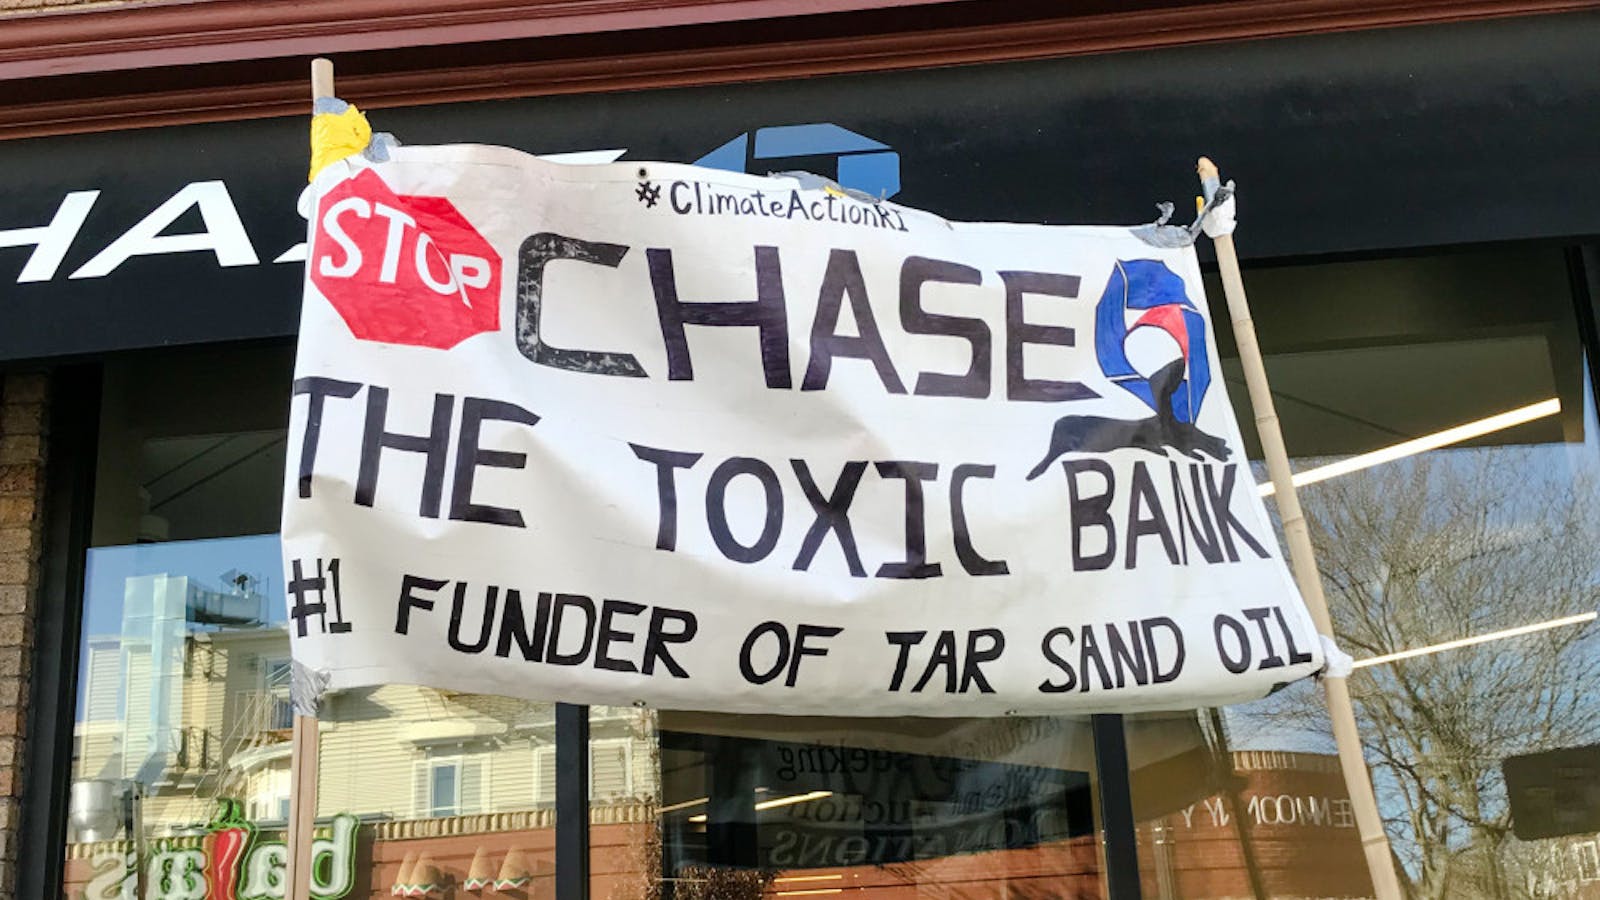 Climate Action RI demands Chase Bank fossil fuel divestment in latest  protest - The Brown Daily Herald